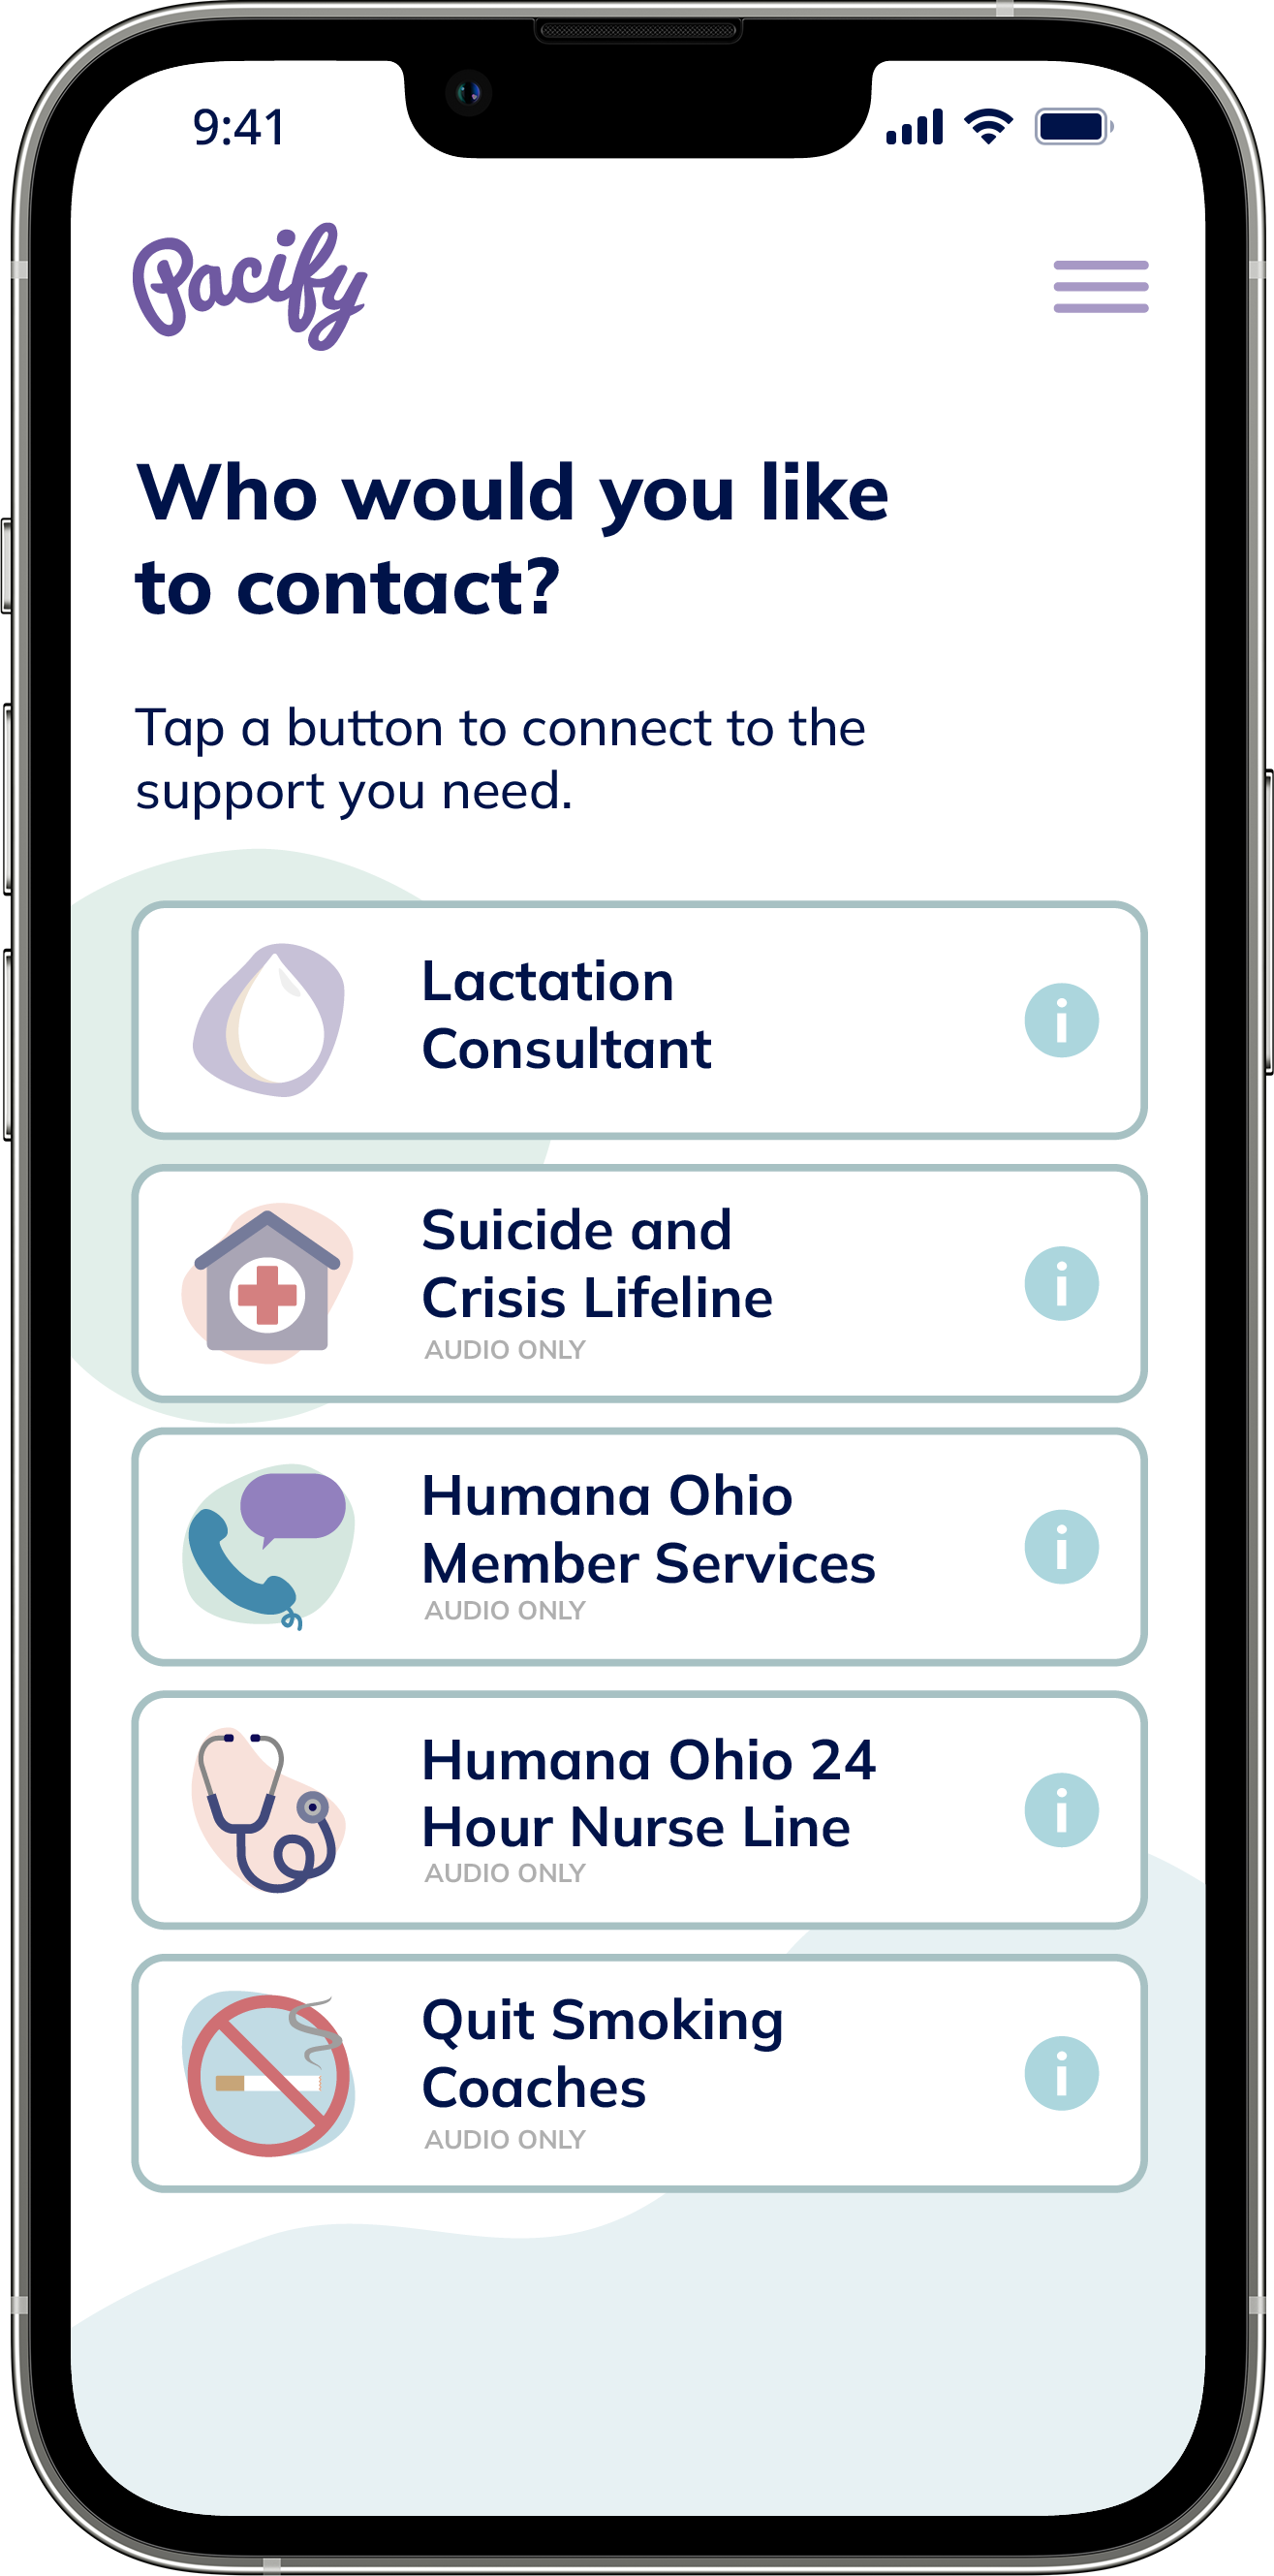 Home screen of Pacify app showing call buttons to Lactation Consultants,  Mental Health CareLine, Humana Ohio Member Services, Humana Ohio 24 Hour Nurse Line,  and Quit Smoking Coaches.